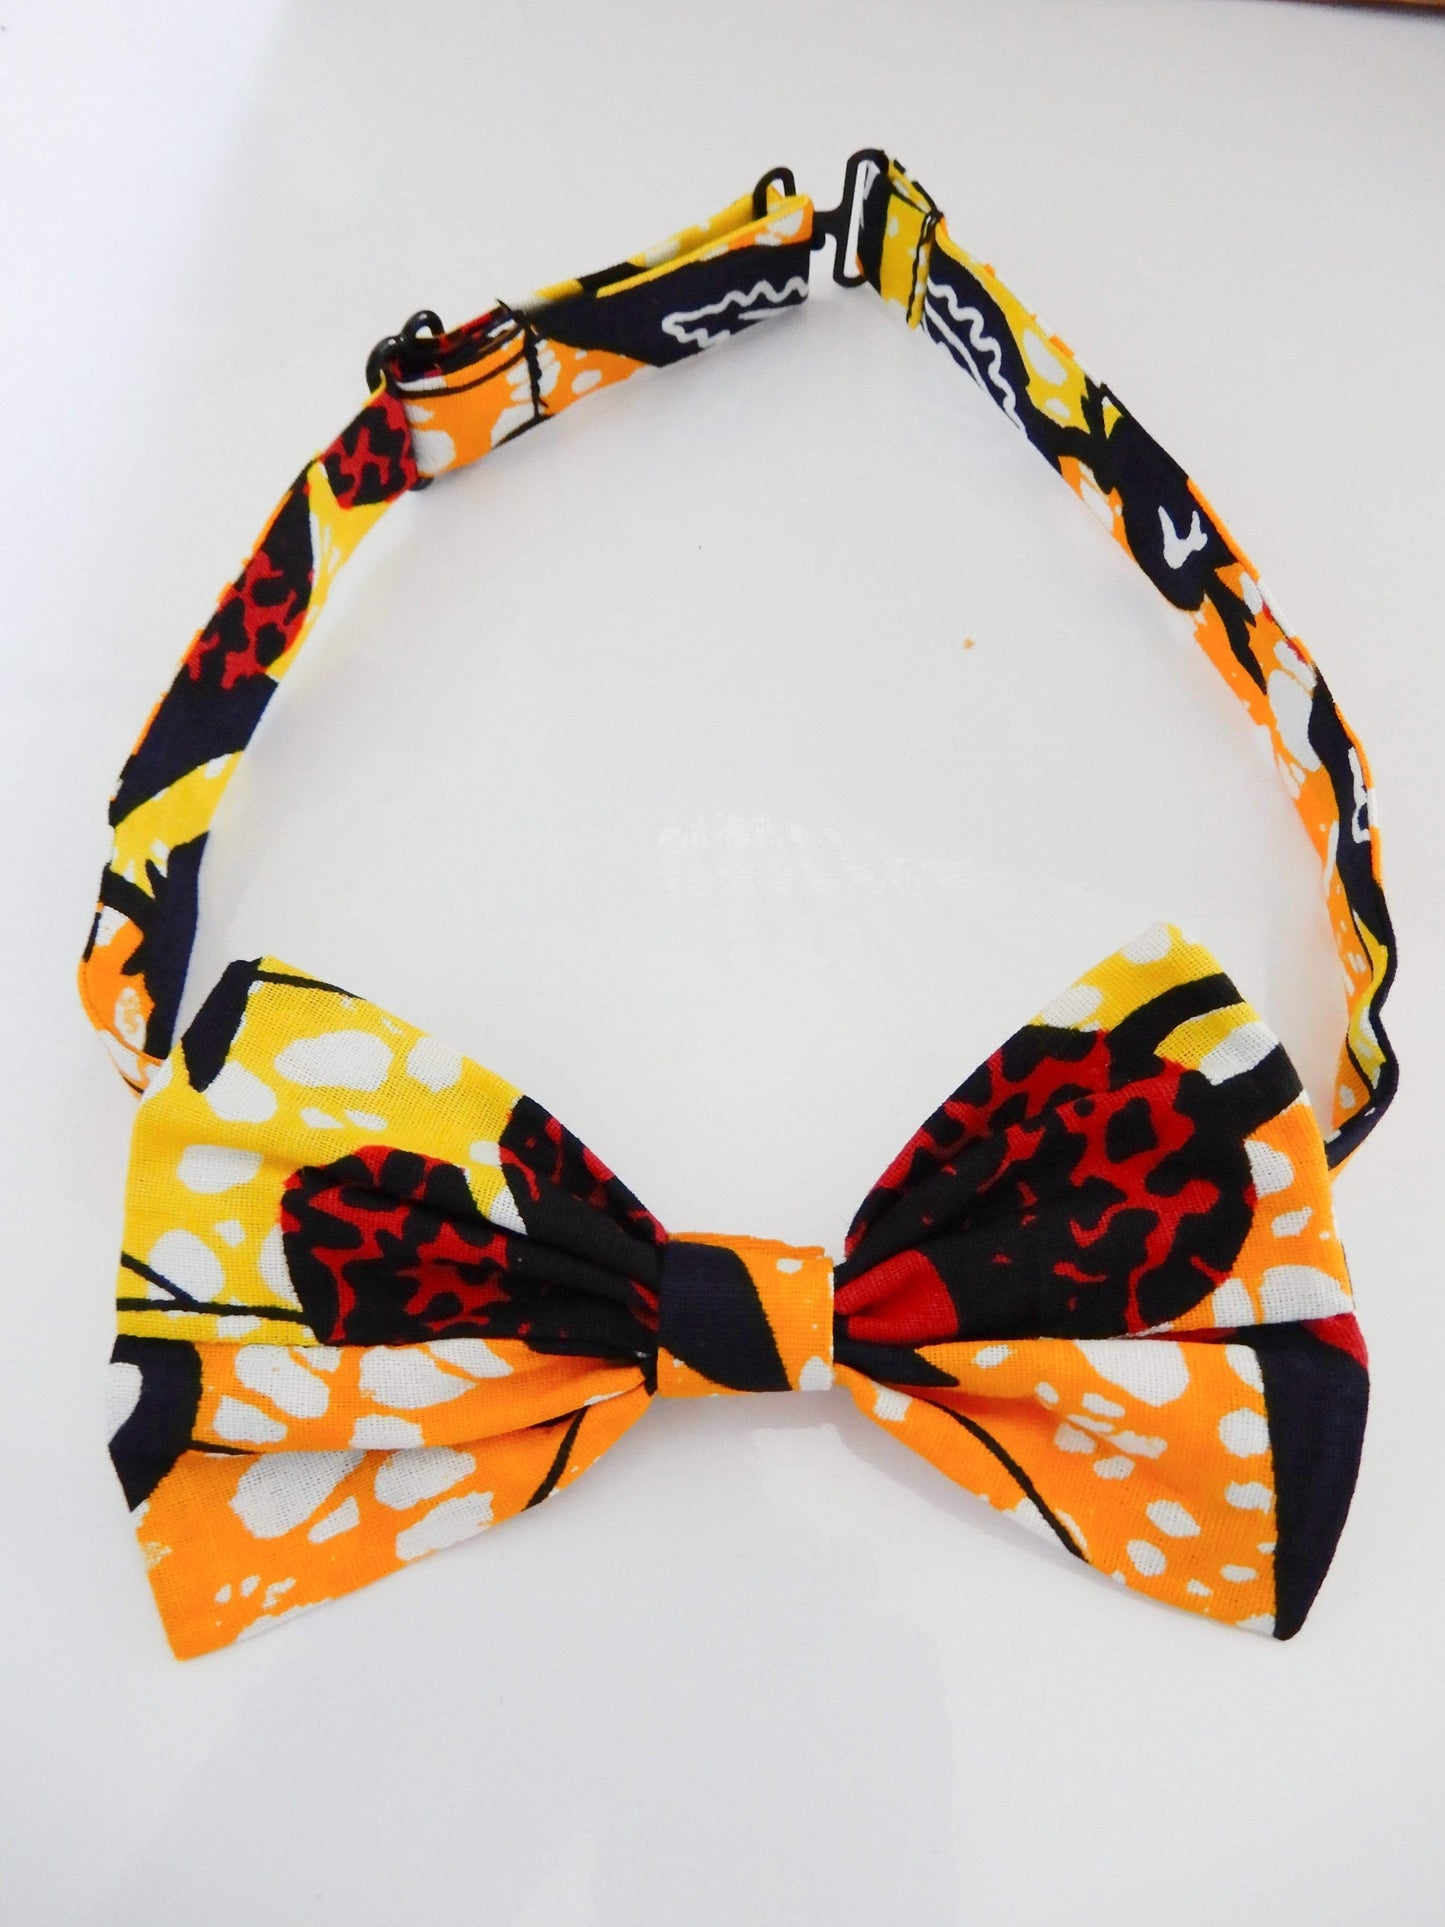 Afrix Style Floral Tie and Bow Tie